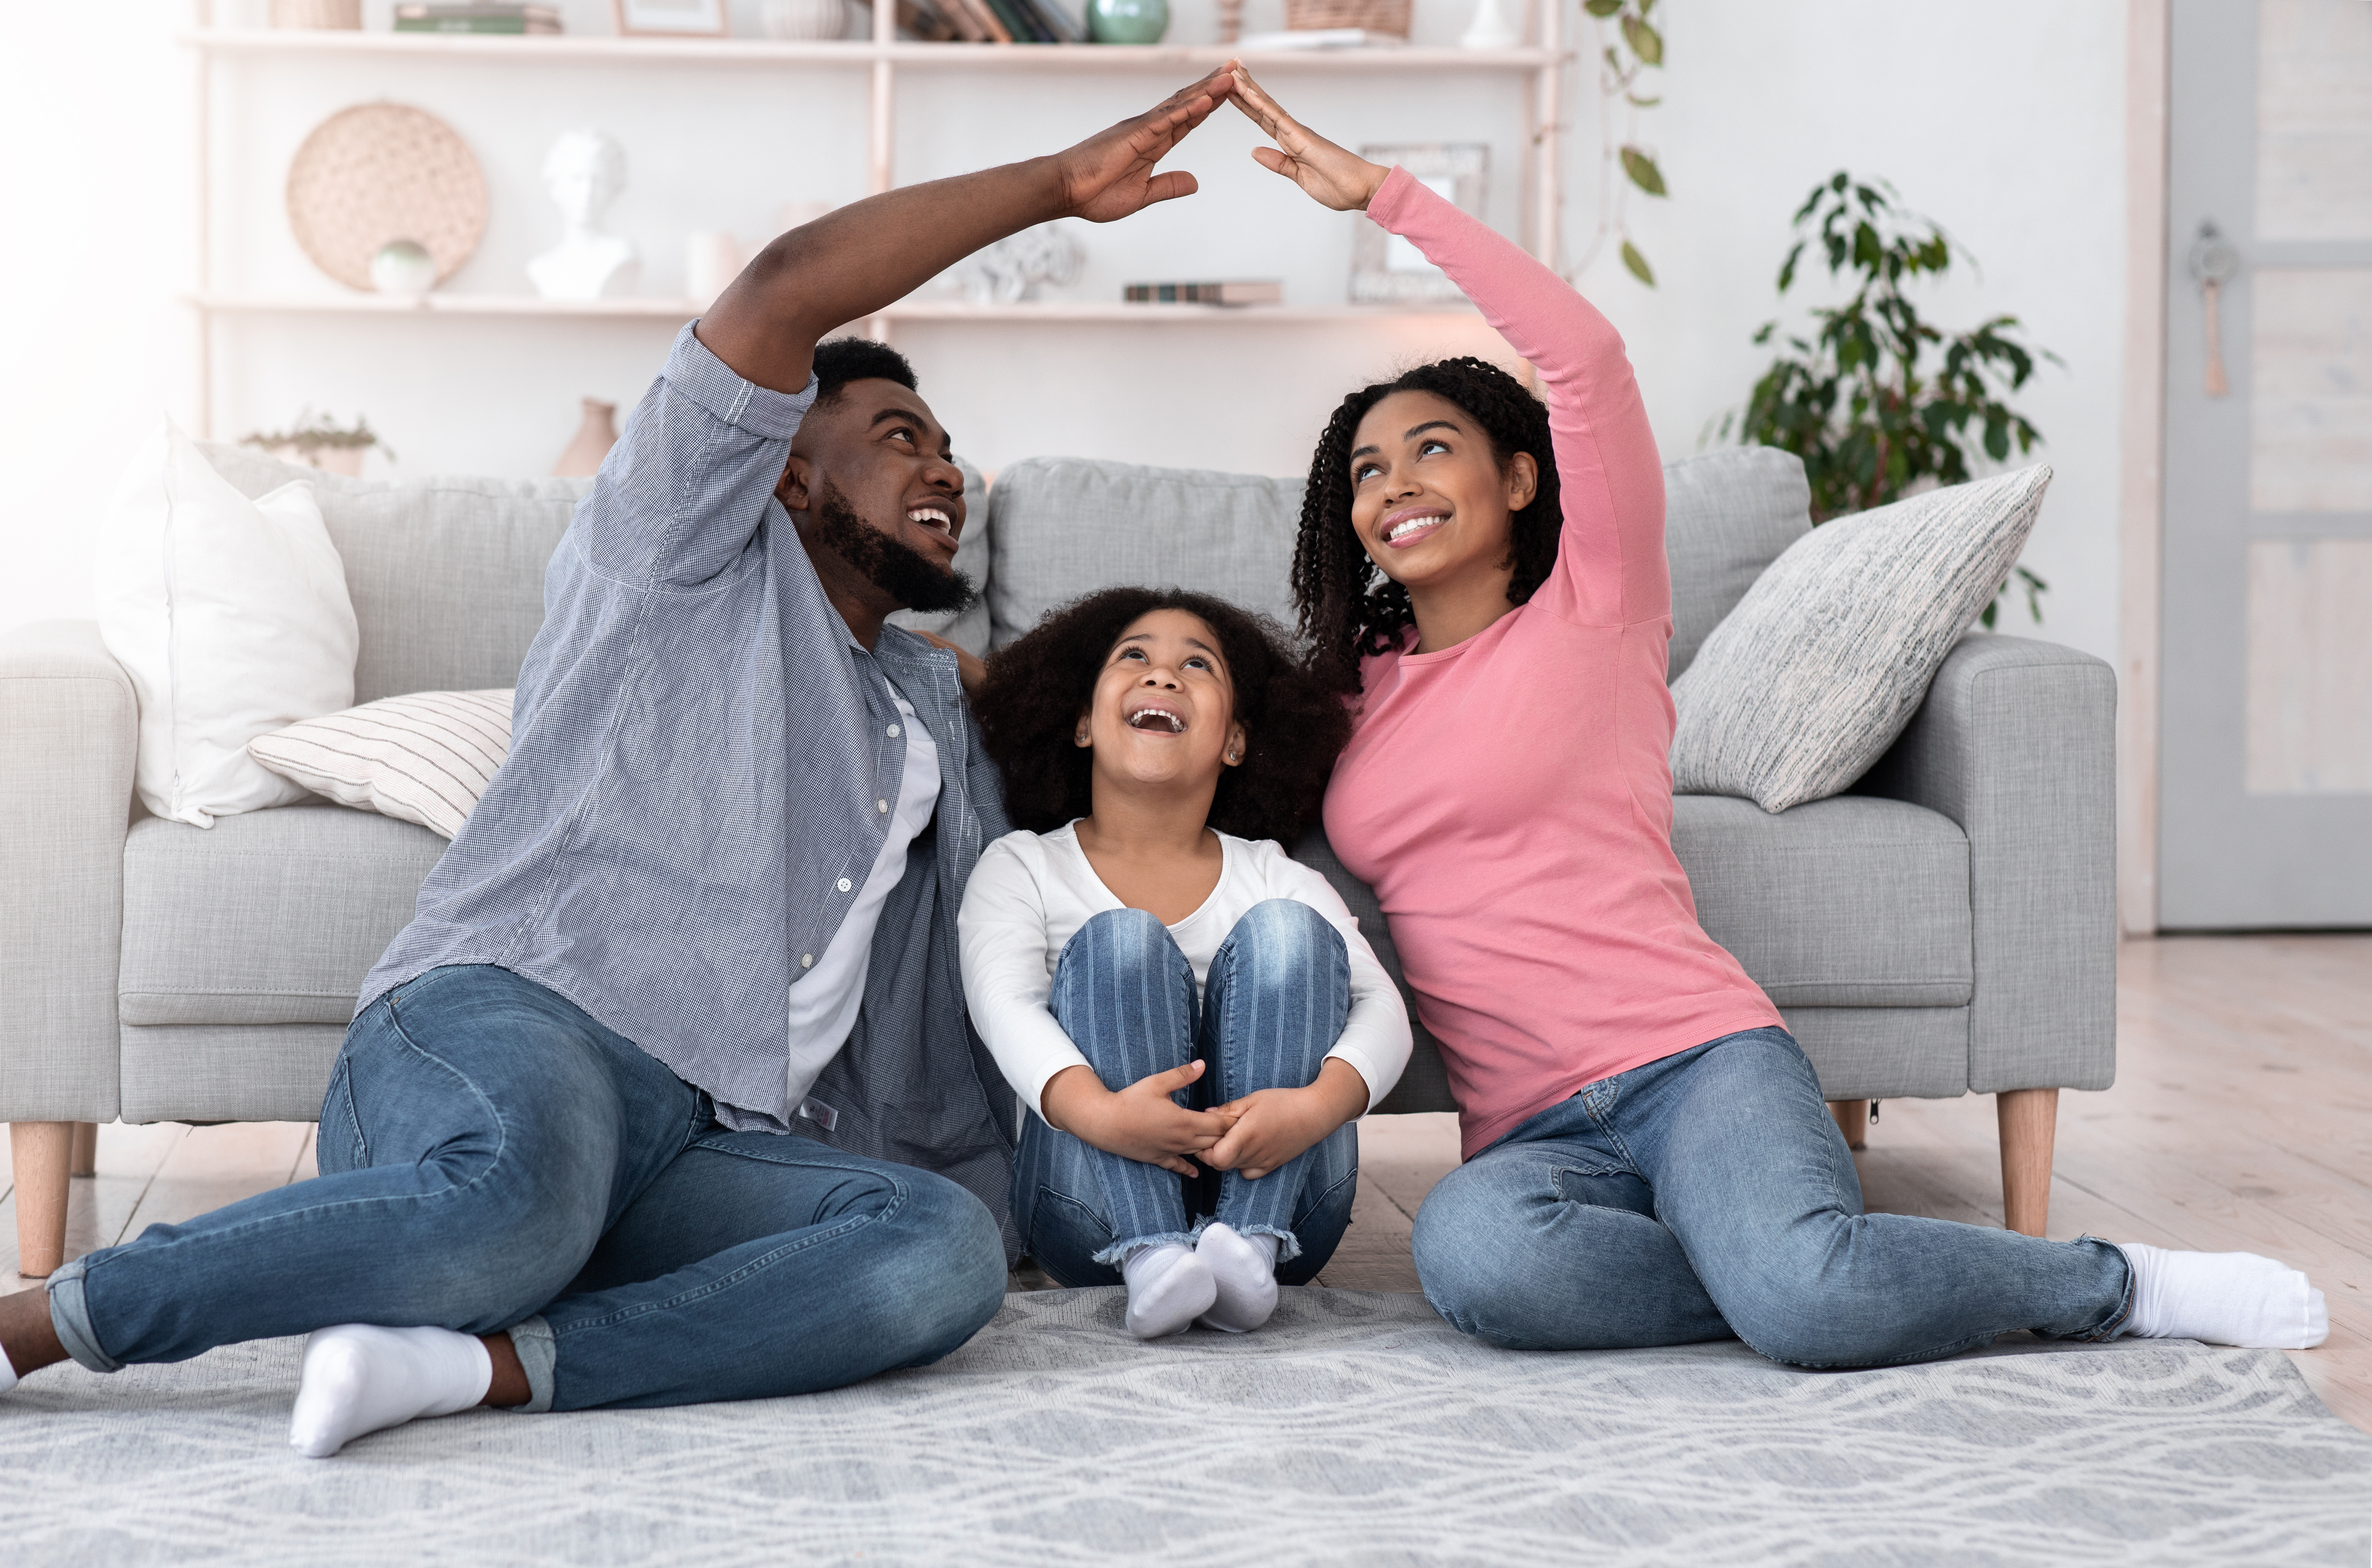 Parents and child having fun in the living room